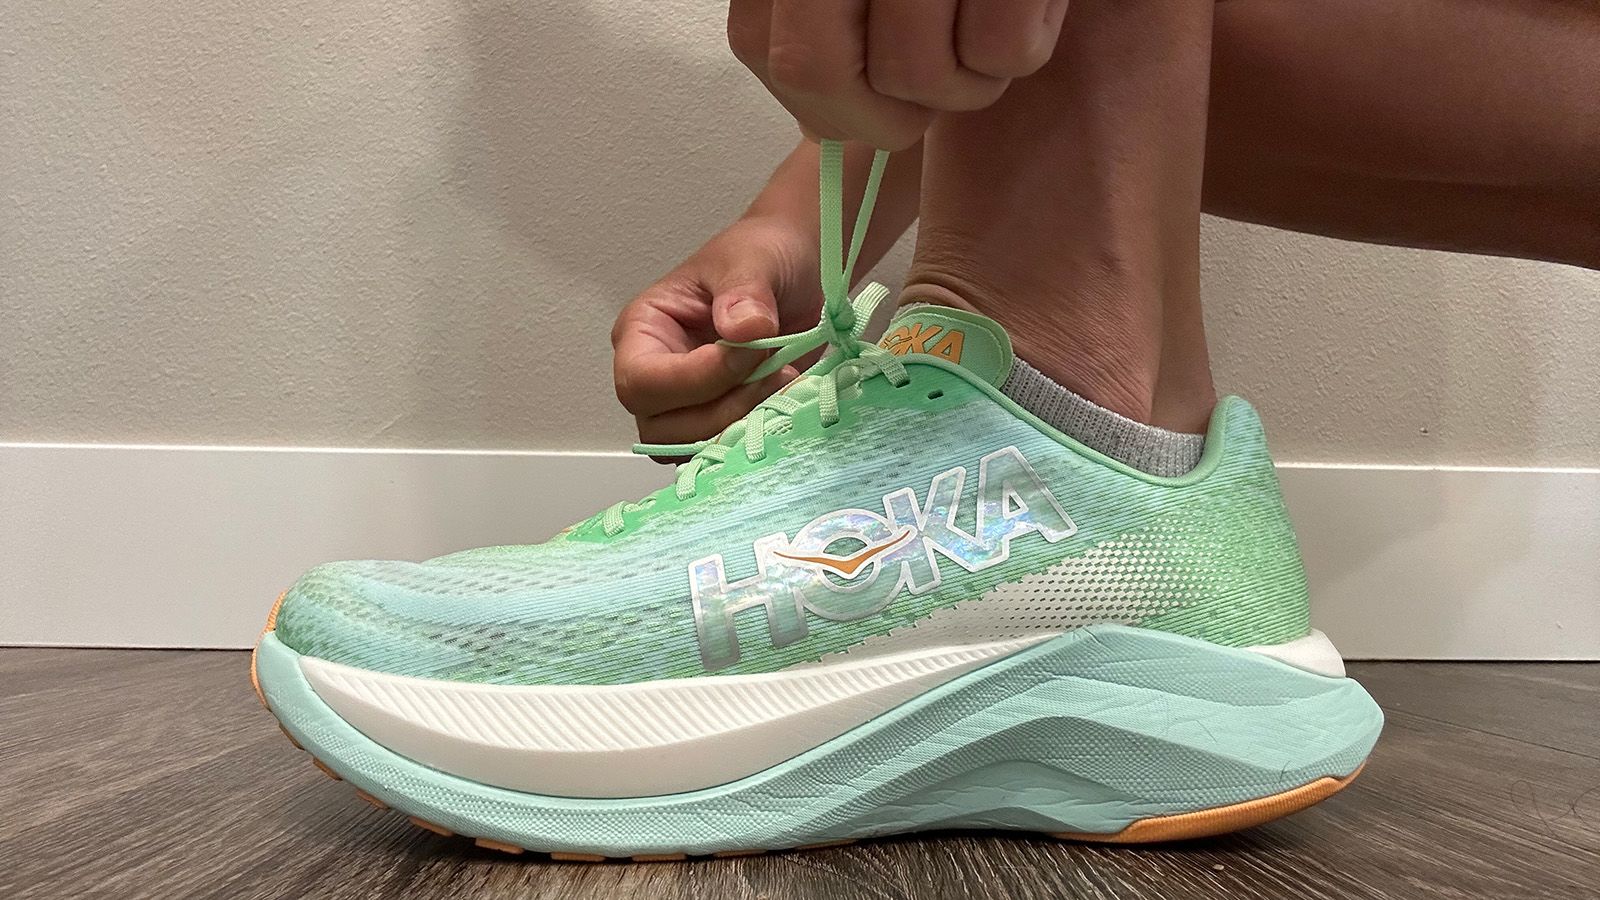 Best Hoka Running Shoes of 2023: What We Know - Believe in the Run